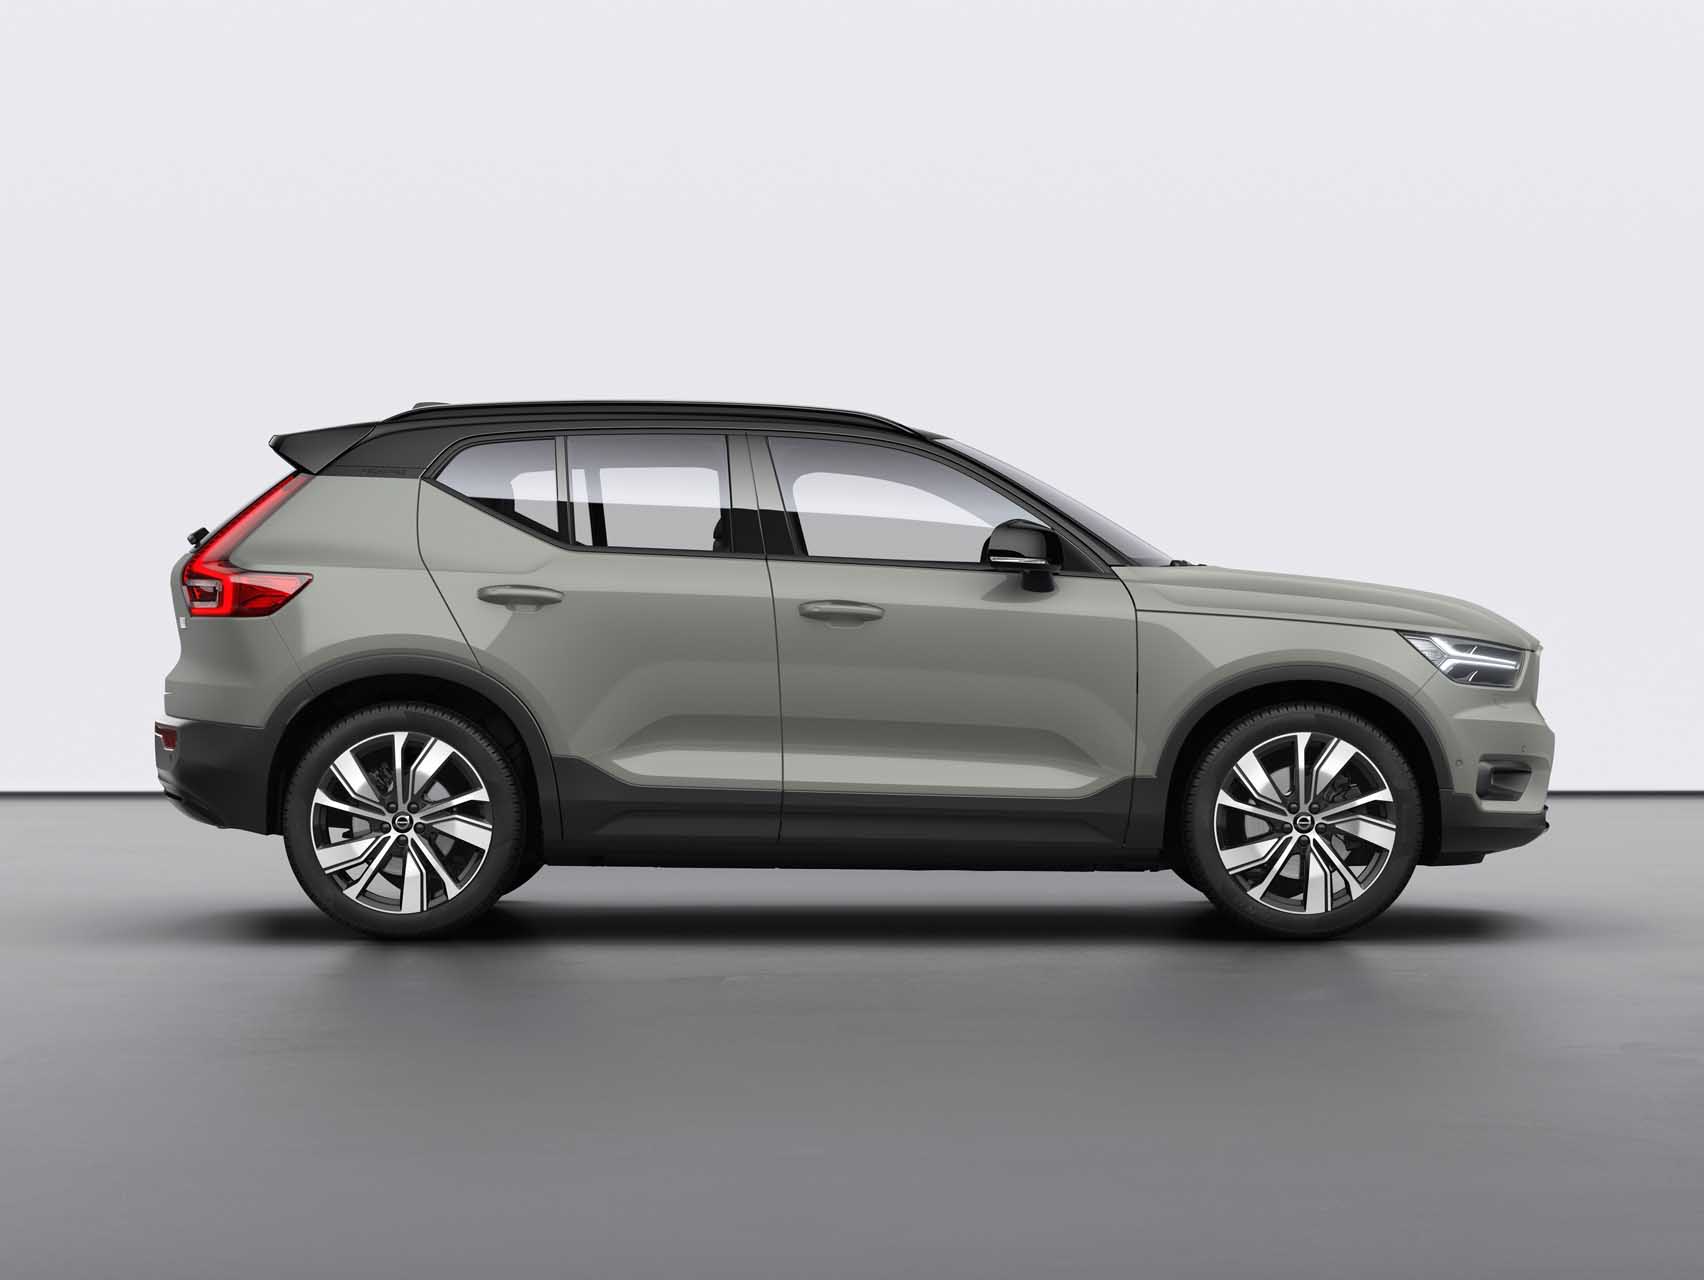 2021 Volvo XC40 Recharge, company's first EV, costs $53,990